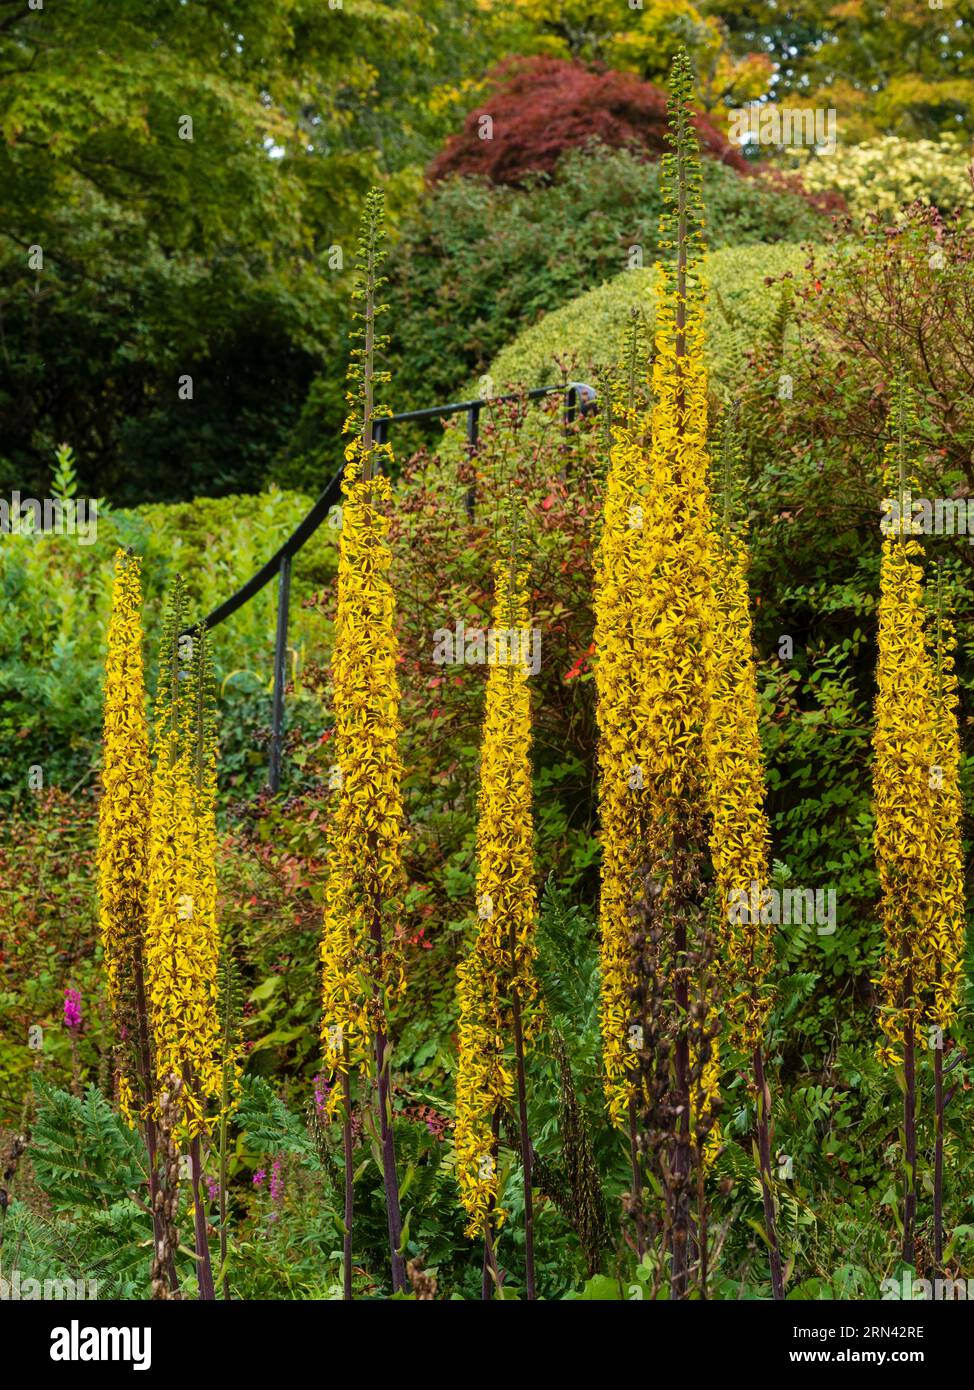 Tall upright late summer spikes of yellow flowers of the hardy perennial Ligularia 'Savill Spire' Stock Photo